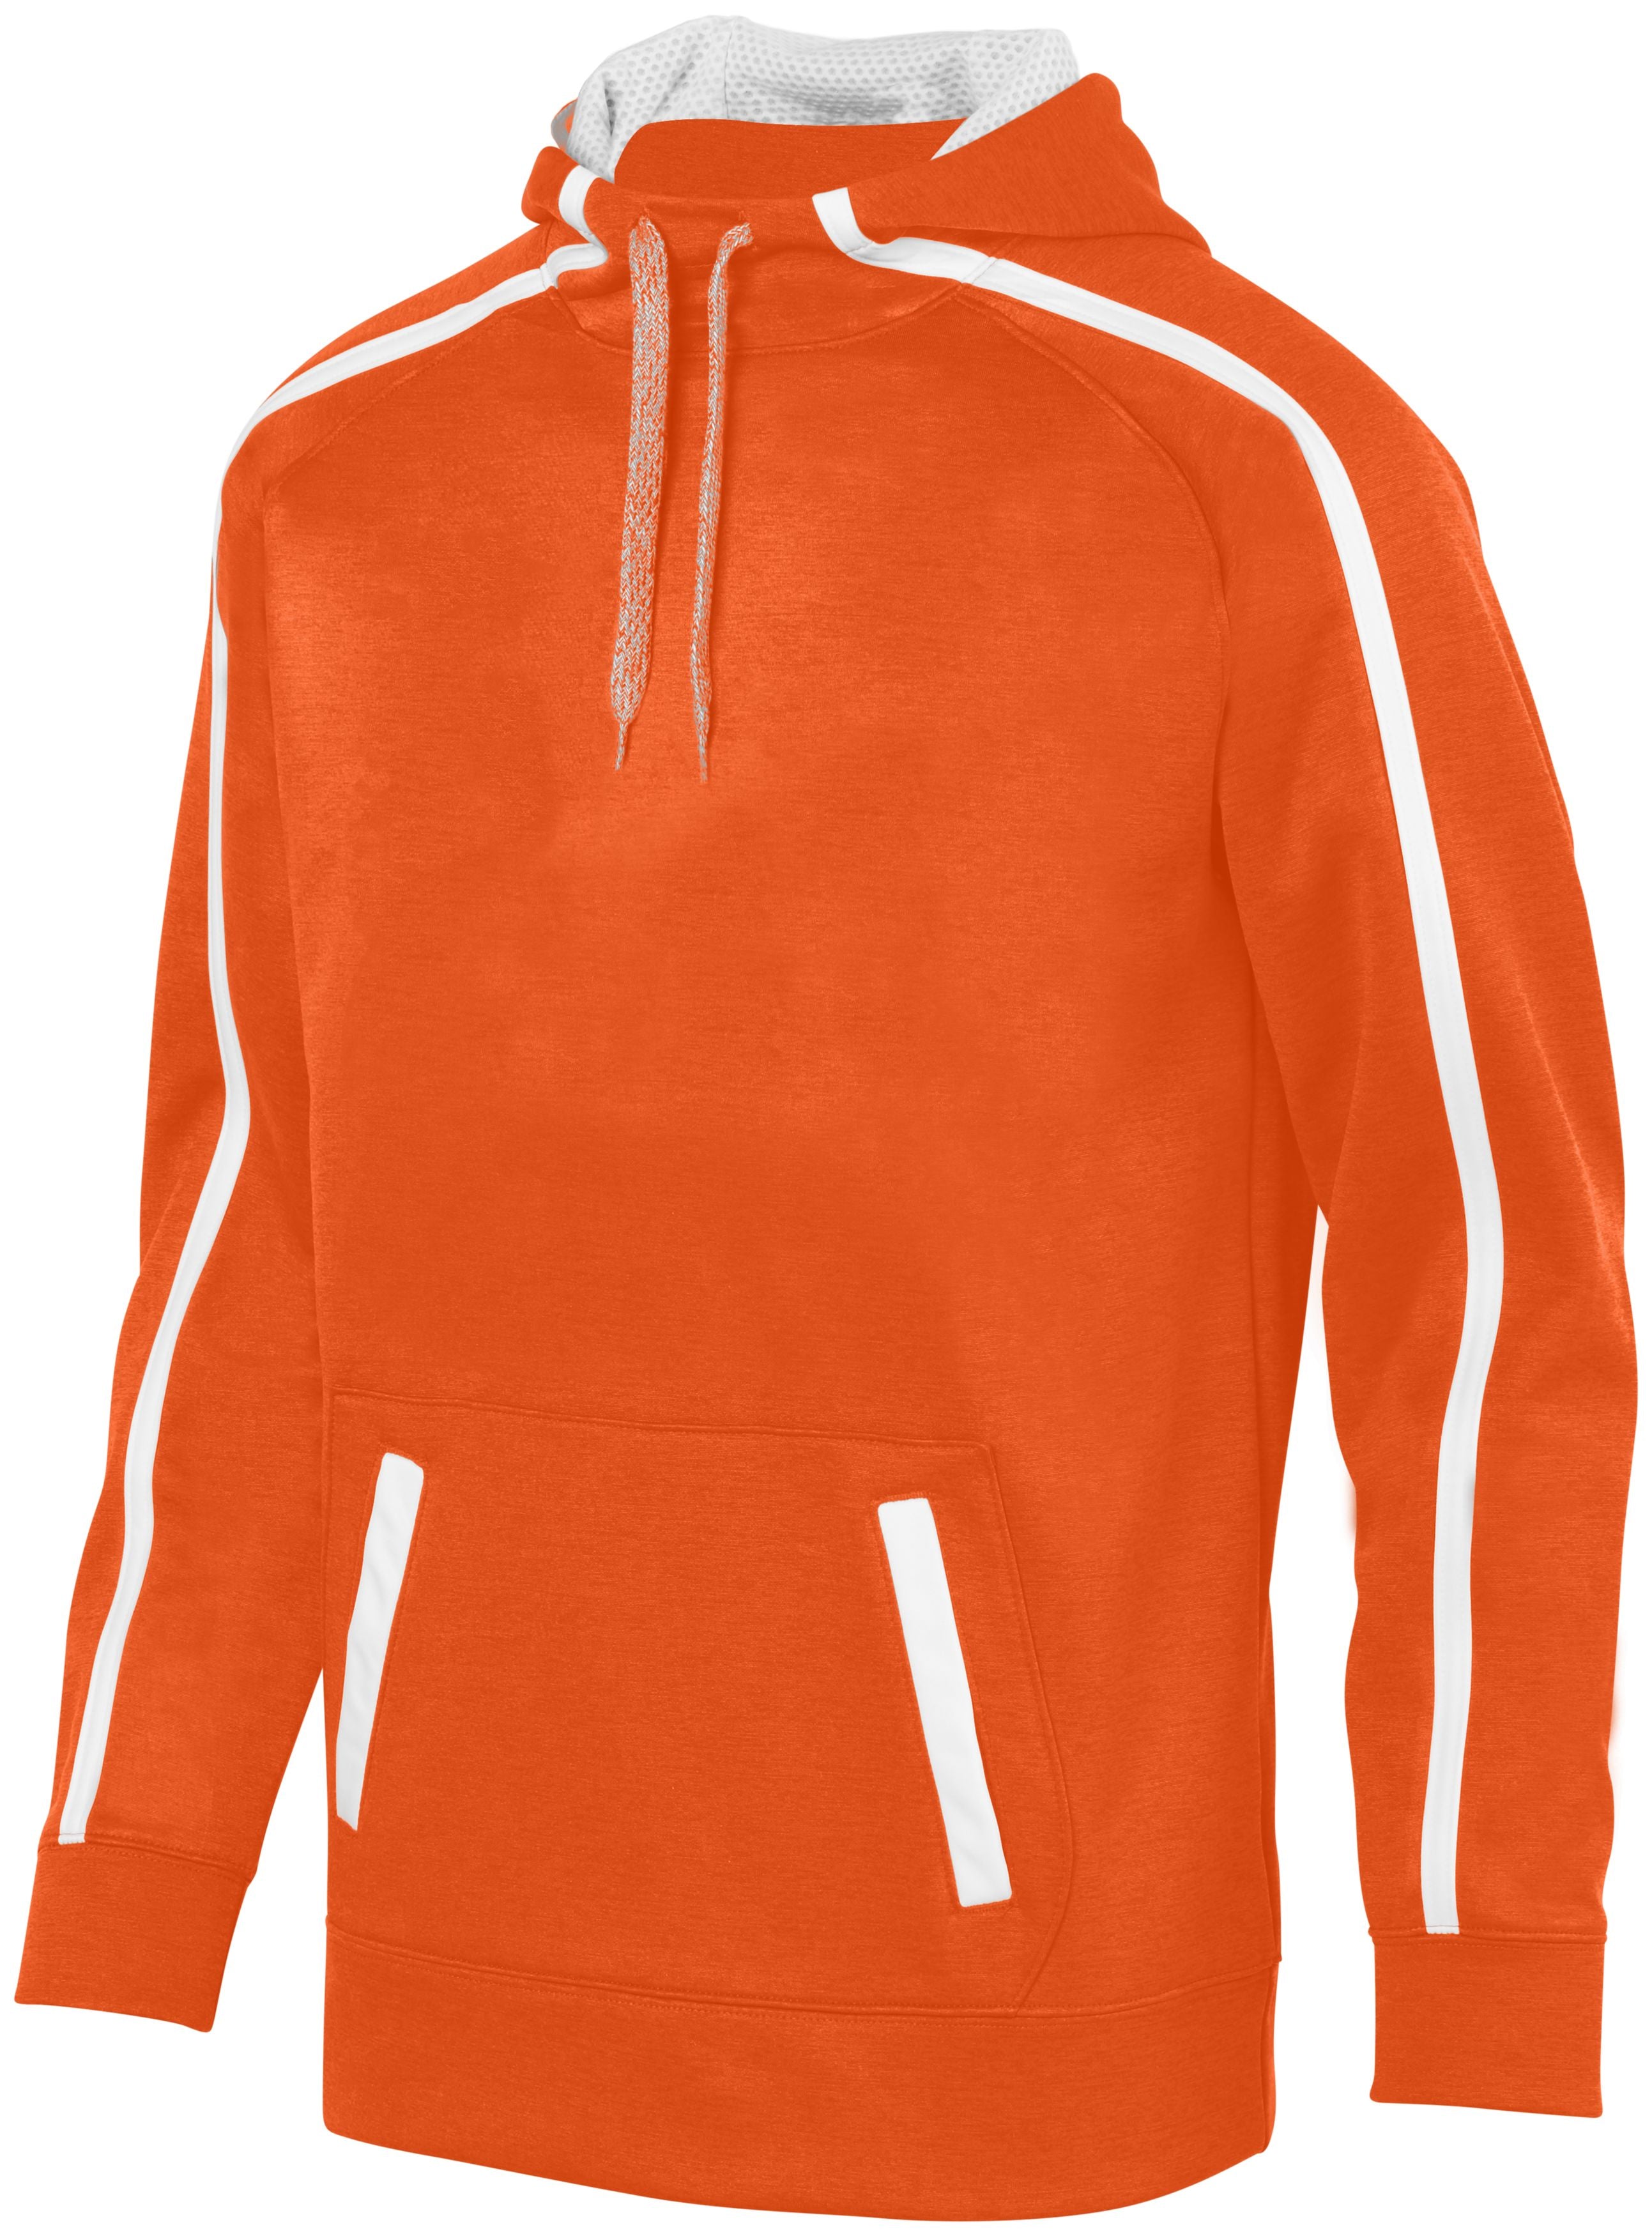 Augusta Sportswear Youth Stoked Tonal Heather Hoodie in Orange/White  -Part of the Youth, Augusta-Products, Shirts, Tonal-Fleece-Collection product lines at KanaleyCreations.com